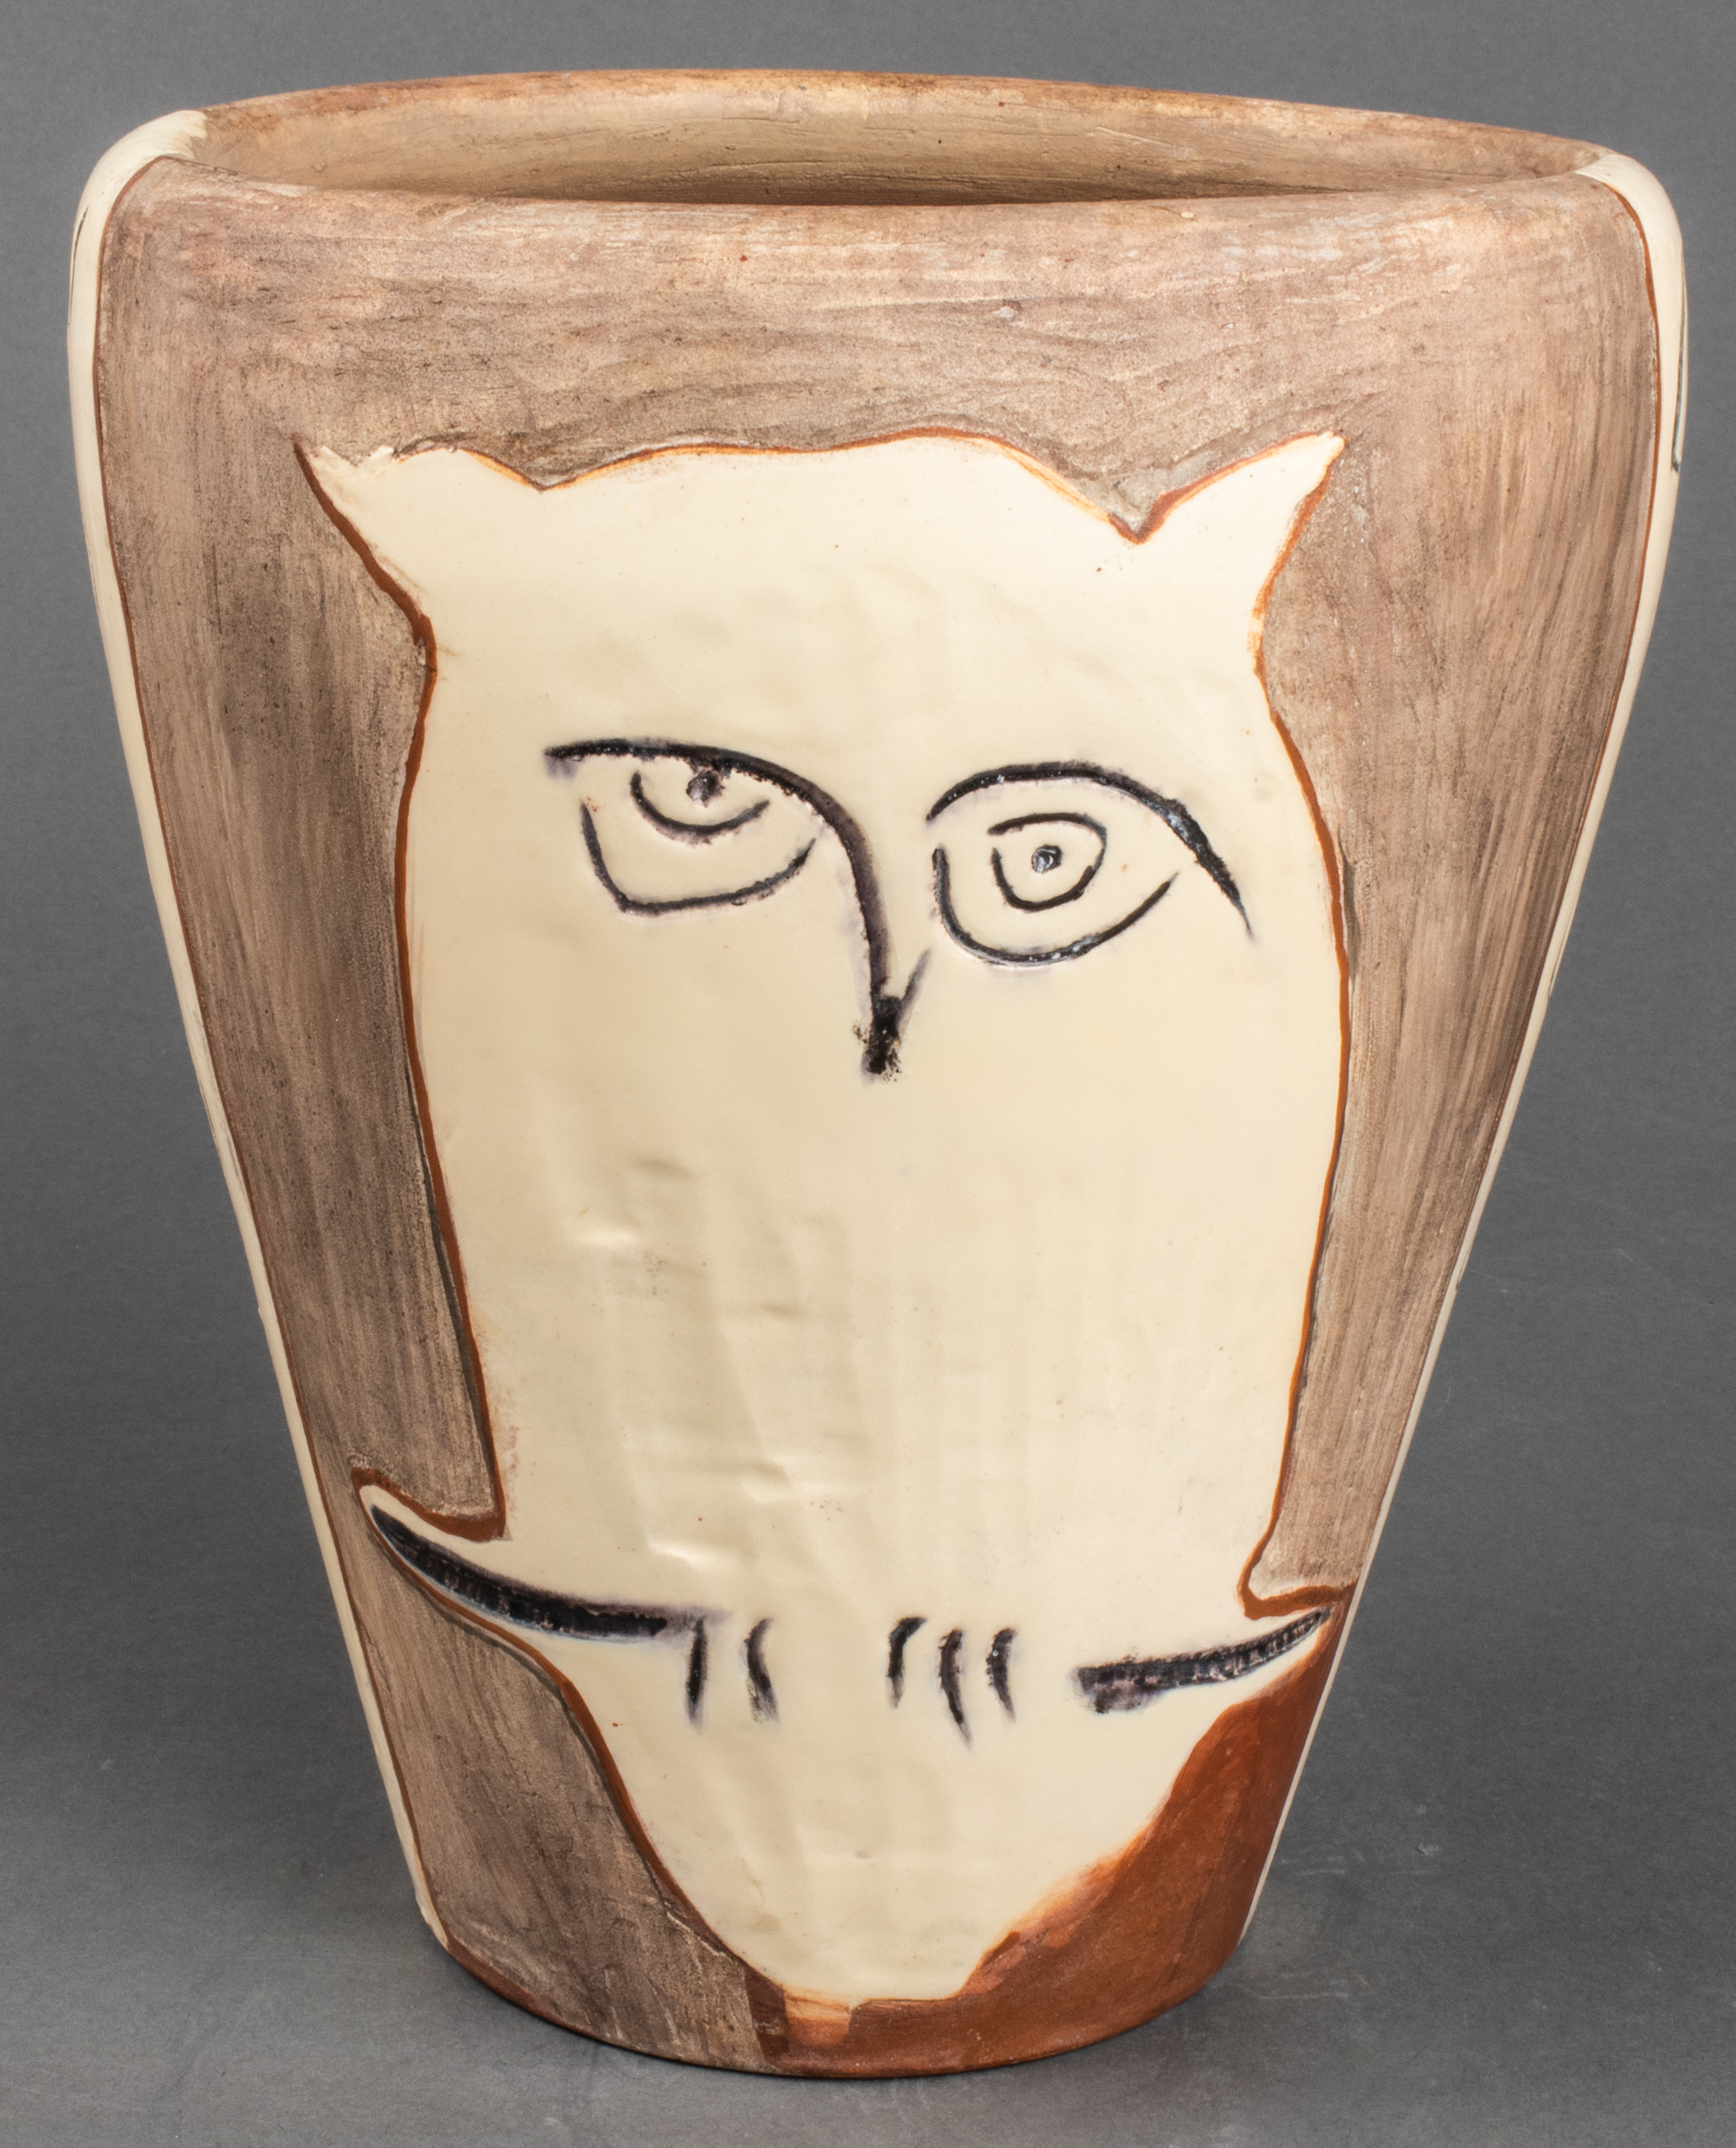 PABLO PICASSO FACE AND OWL POTTERY 3c34ee